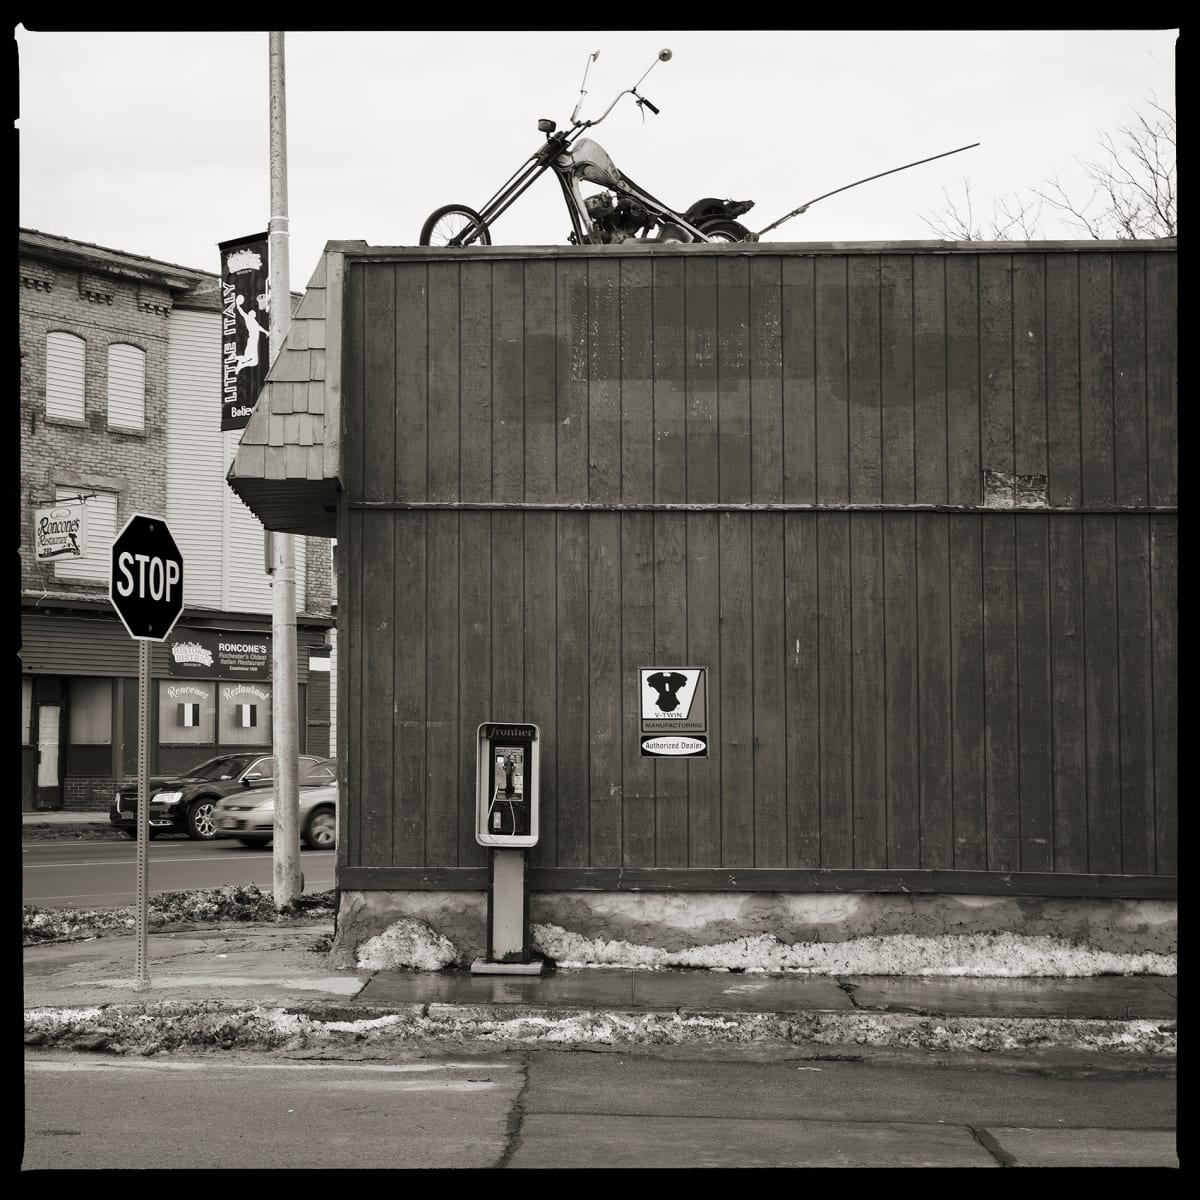 585.254.9533 – Freebird Cycles, Lyell Avenue, Rochester, NY 14618 by Eric T. Kunsman  Image: ID: A black and white image shows a payphone against a dark grey building on a corner.  On the roof of the building is a motorcycle statue.  There is a stop sign to the left.